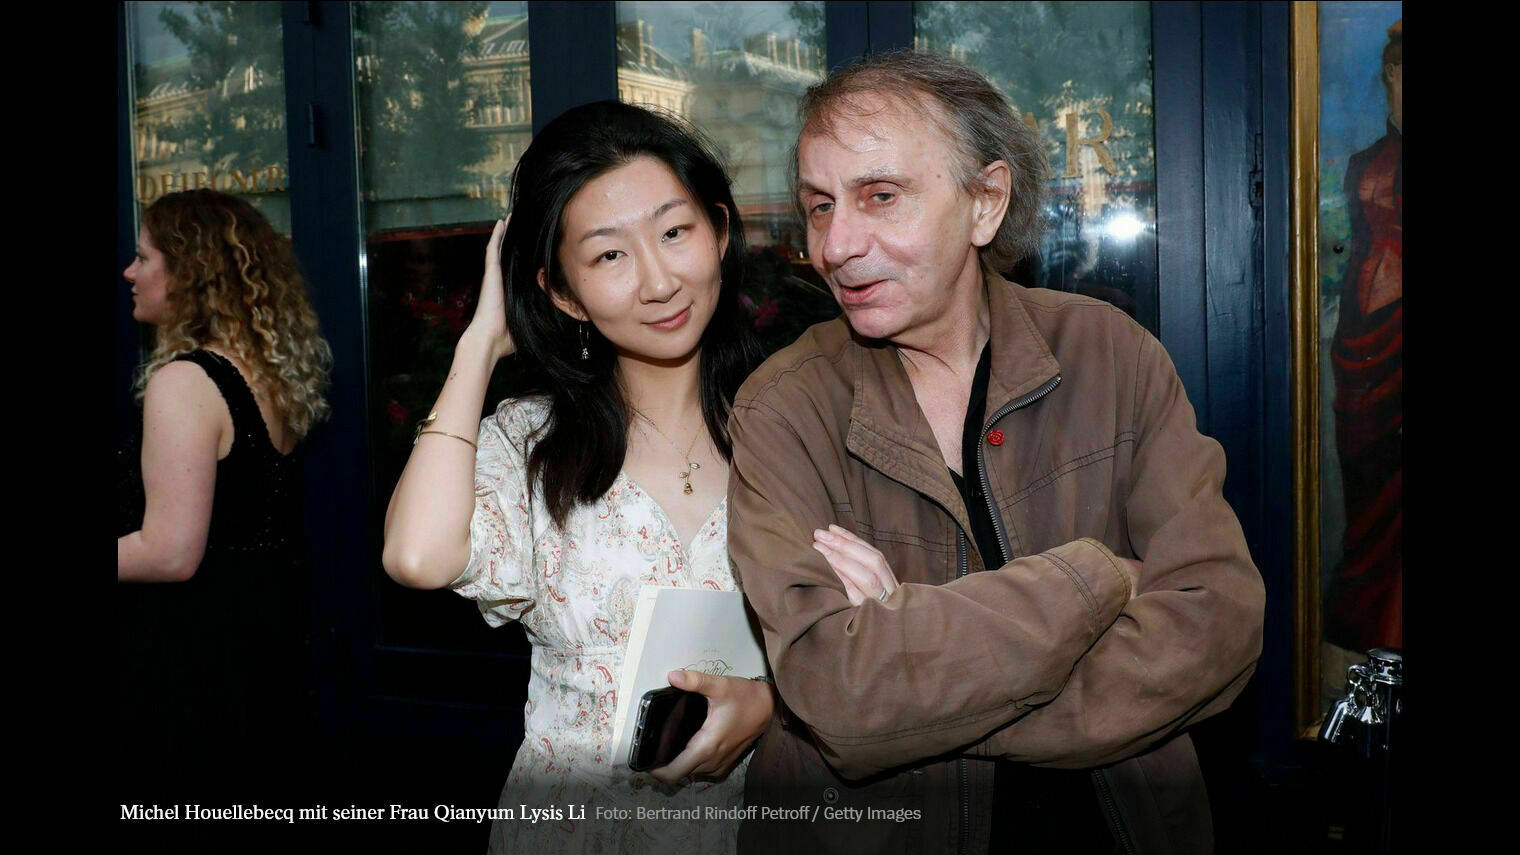 Writer Michel Houellebecq could not ban the release of a porn film with his participation